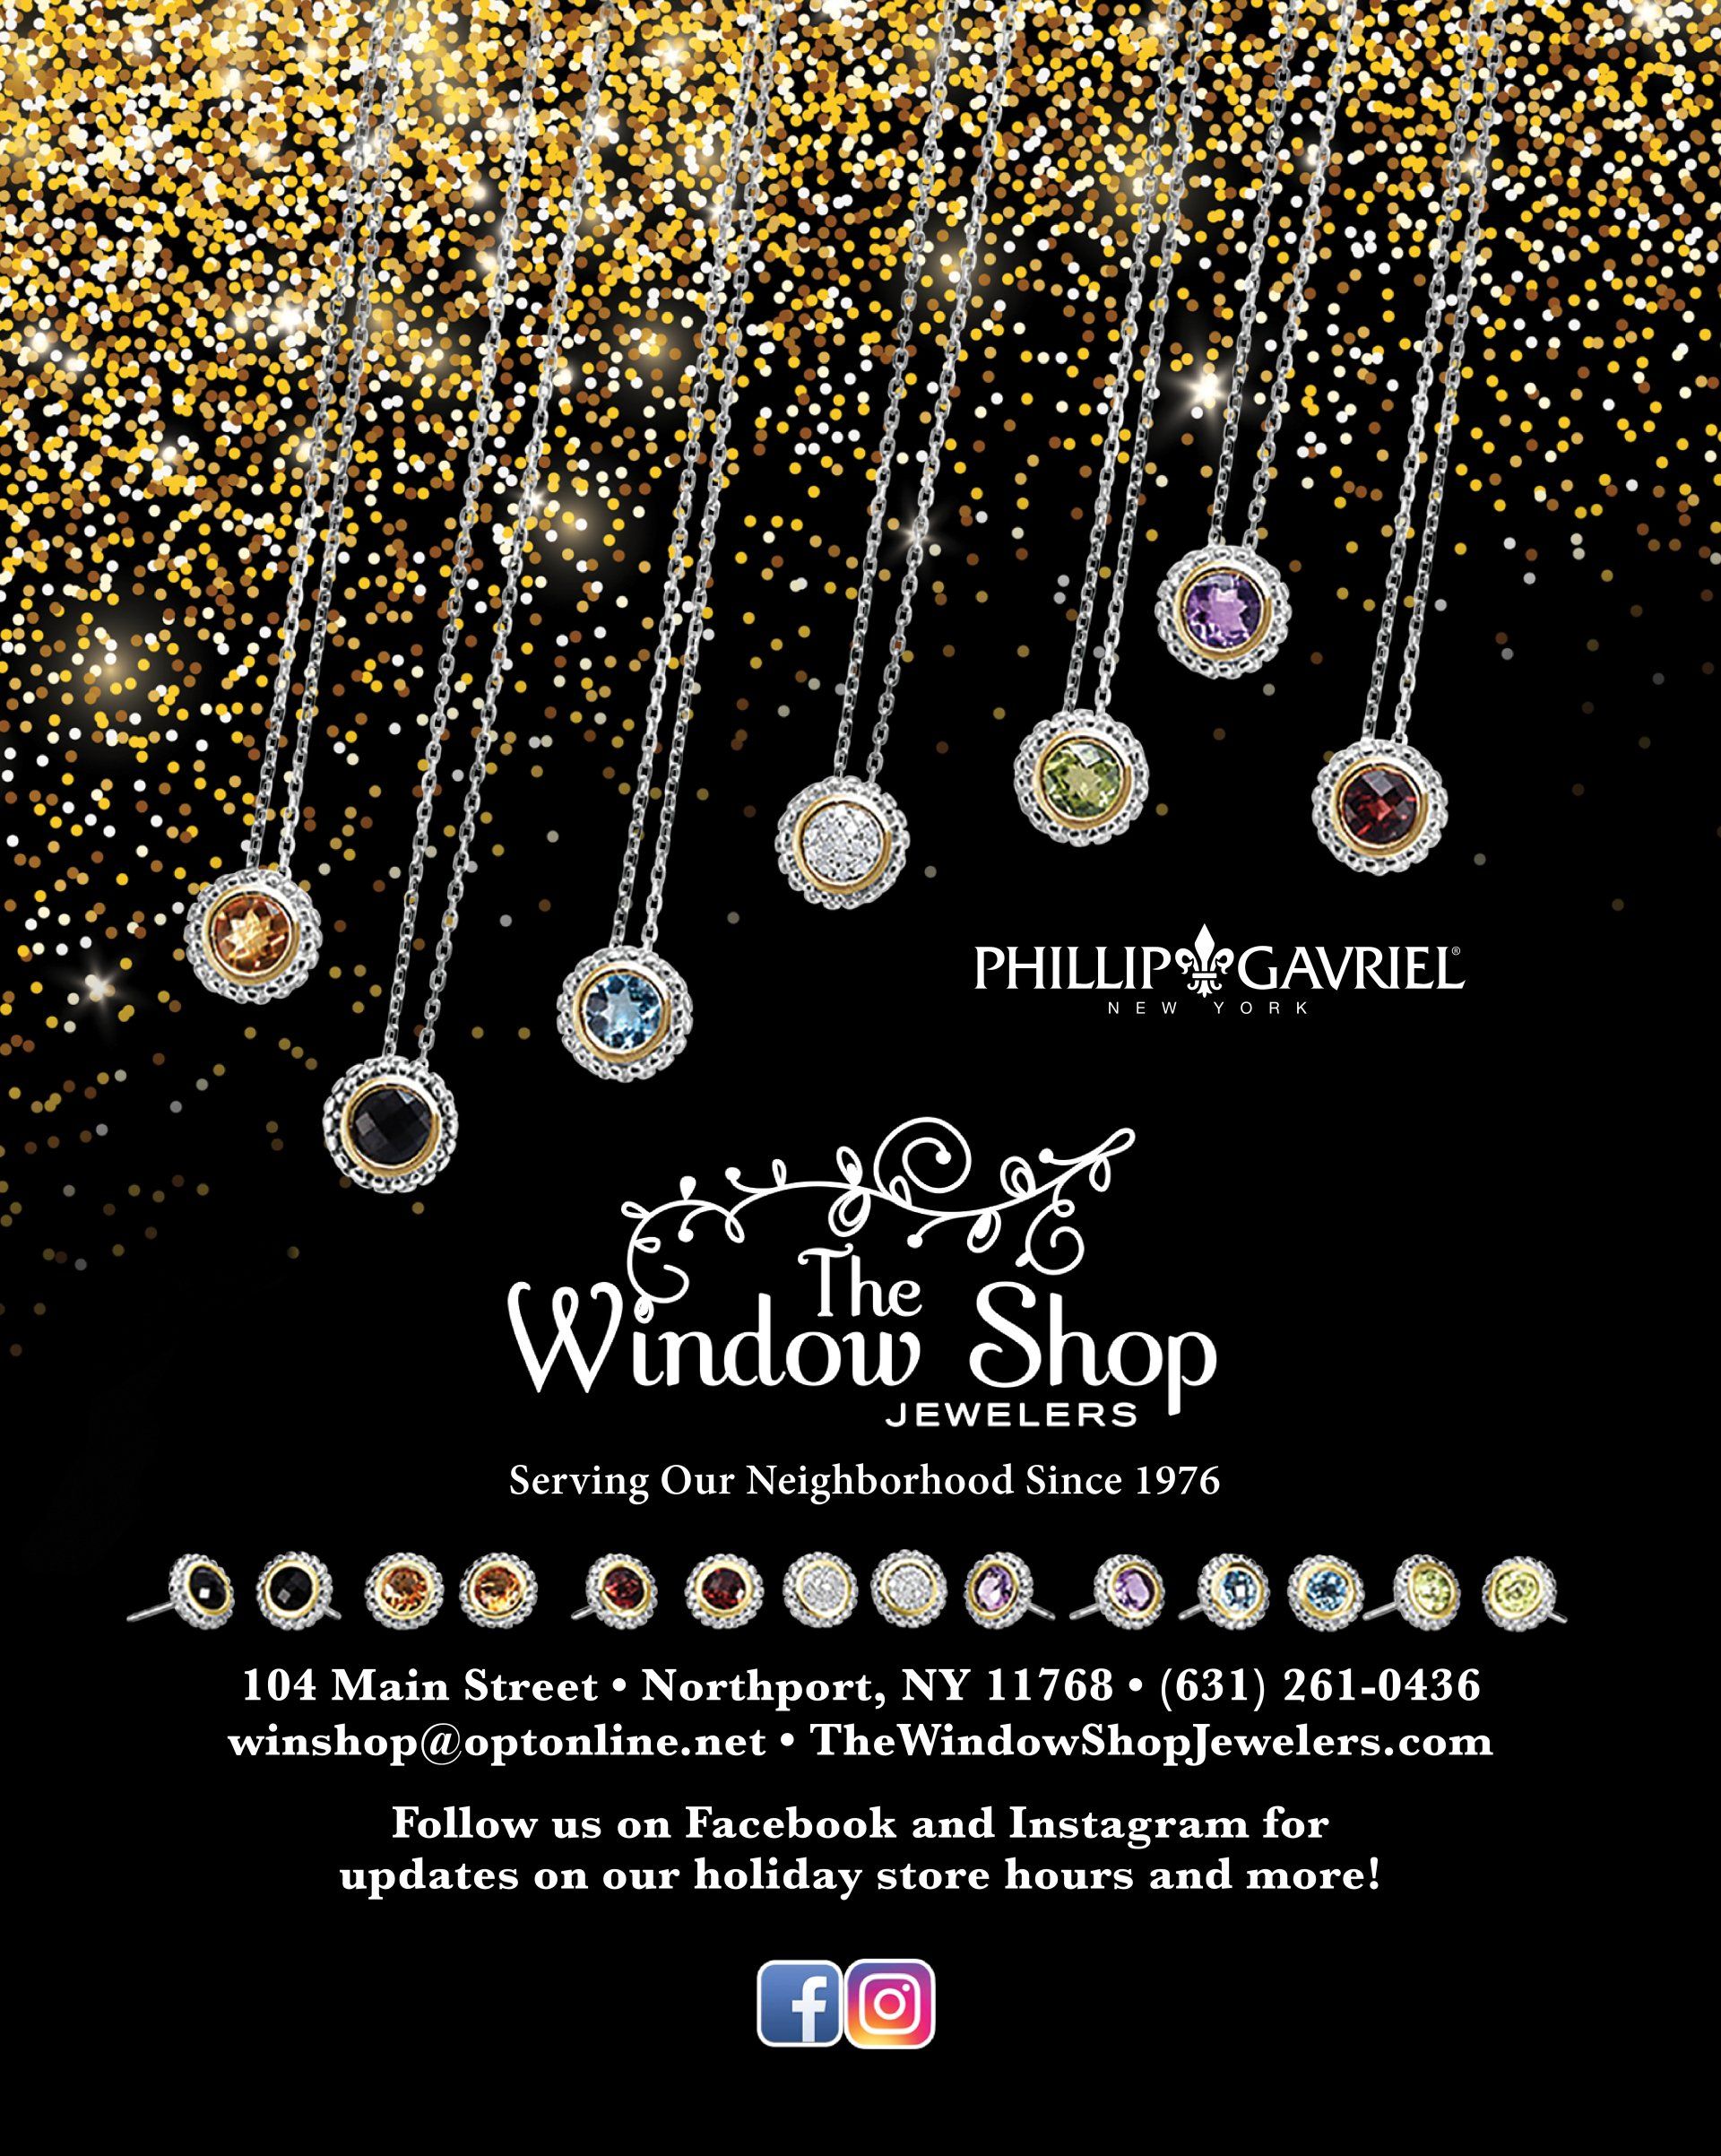 An advertisement for the window shop shows a variety of necklaces